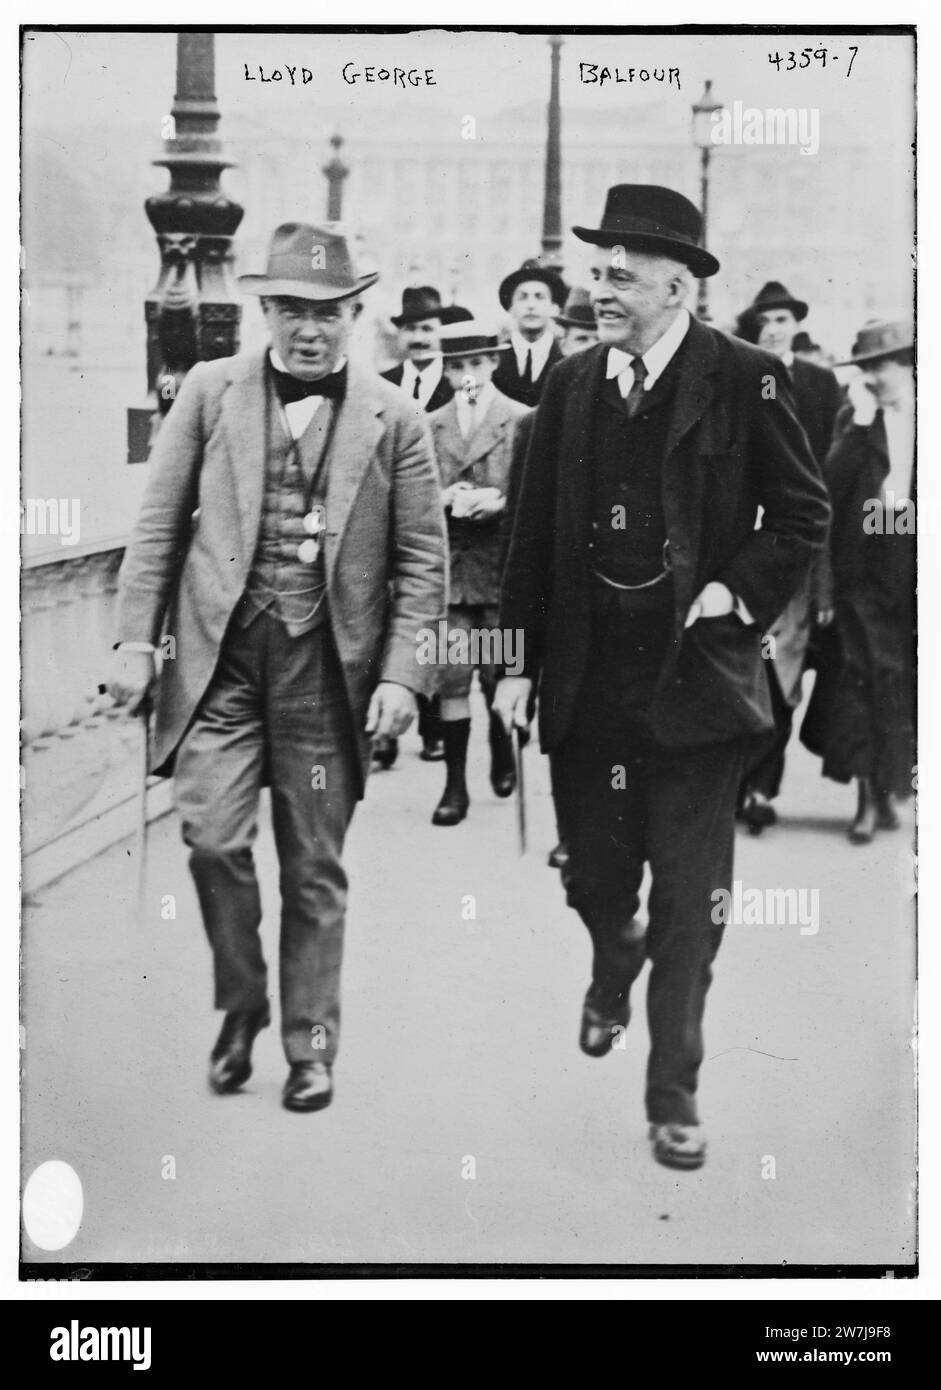 Lloyd George & Balfour.   British Liberal Party statesman and Prime Minister David Lloyd George with Conservative Party politician and Foreign Minister Arthur James Balfour.  During the Allied Conference in Paris, July 1917. Stock Photo